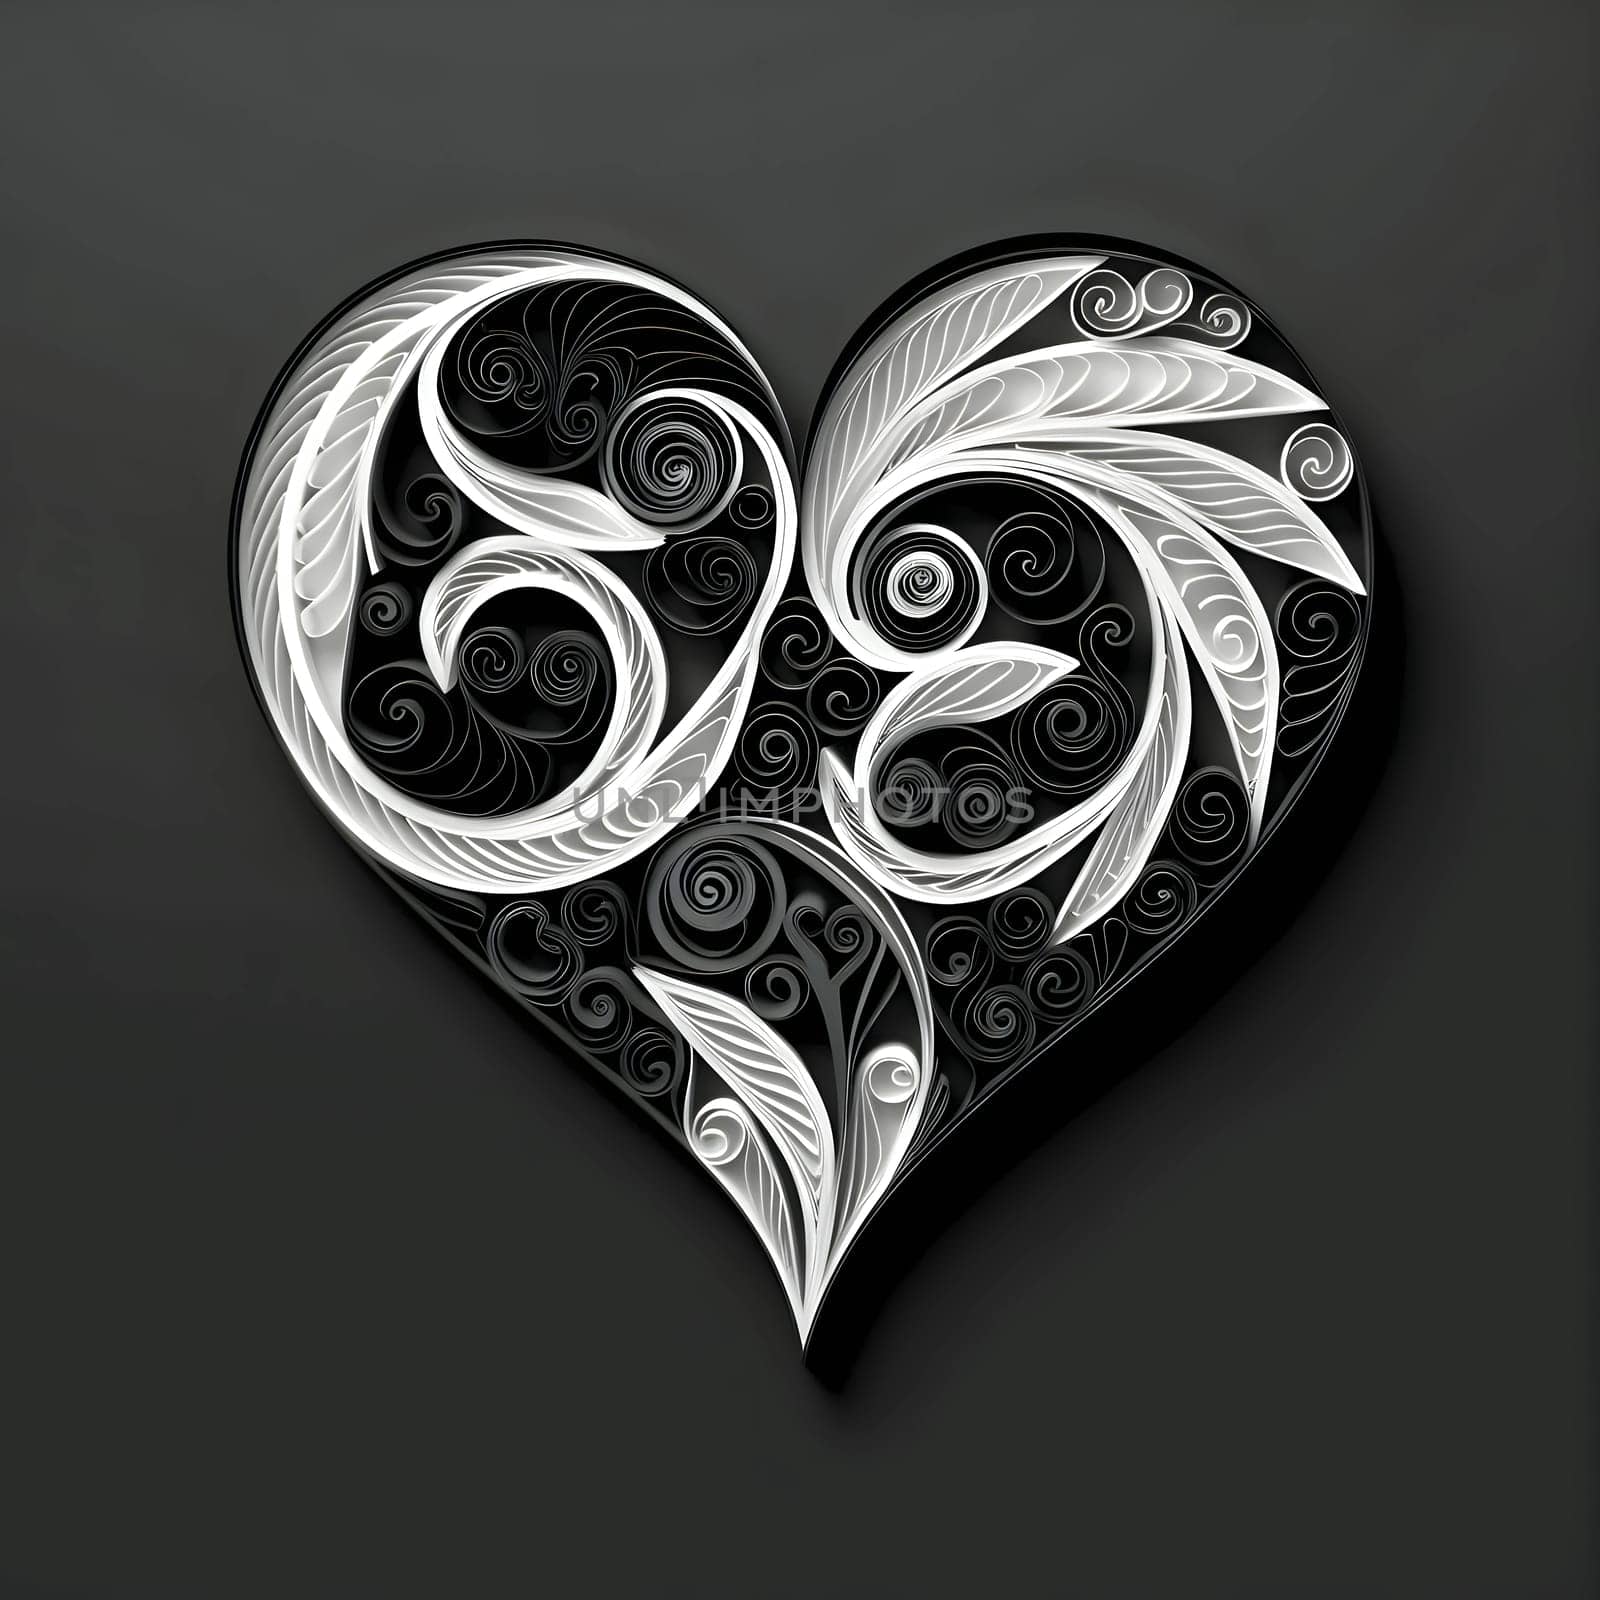 An abstract heart design in black and white.